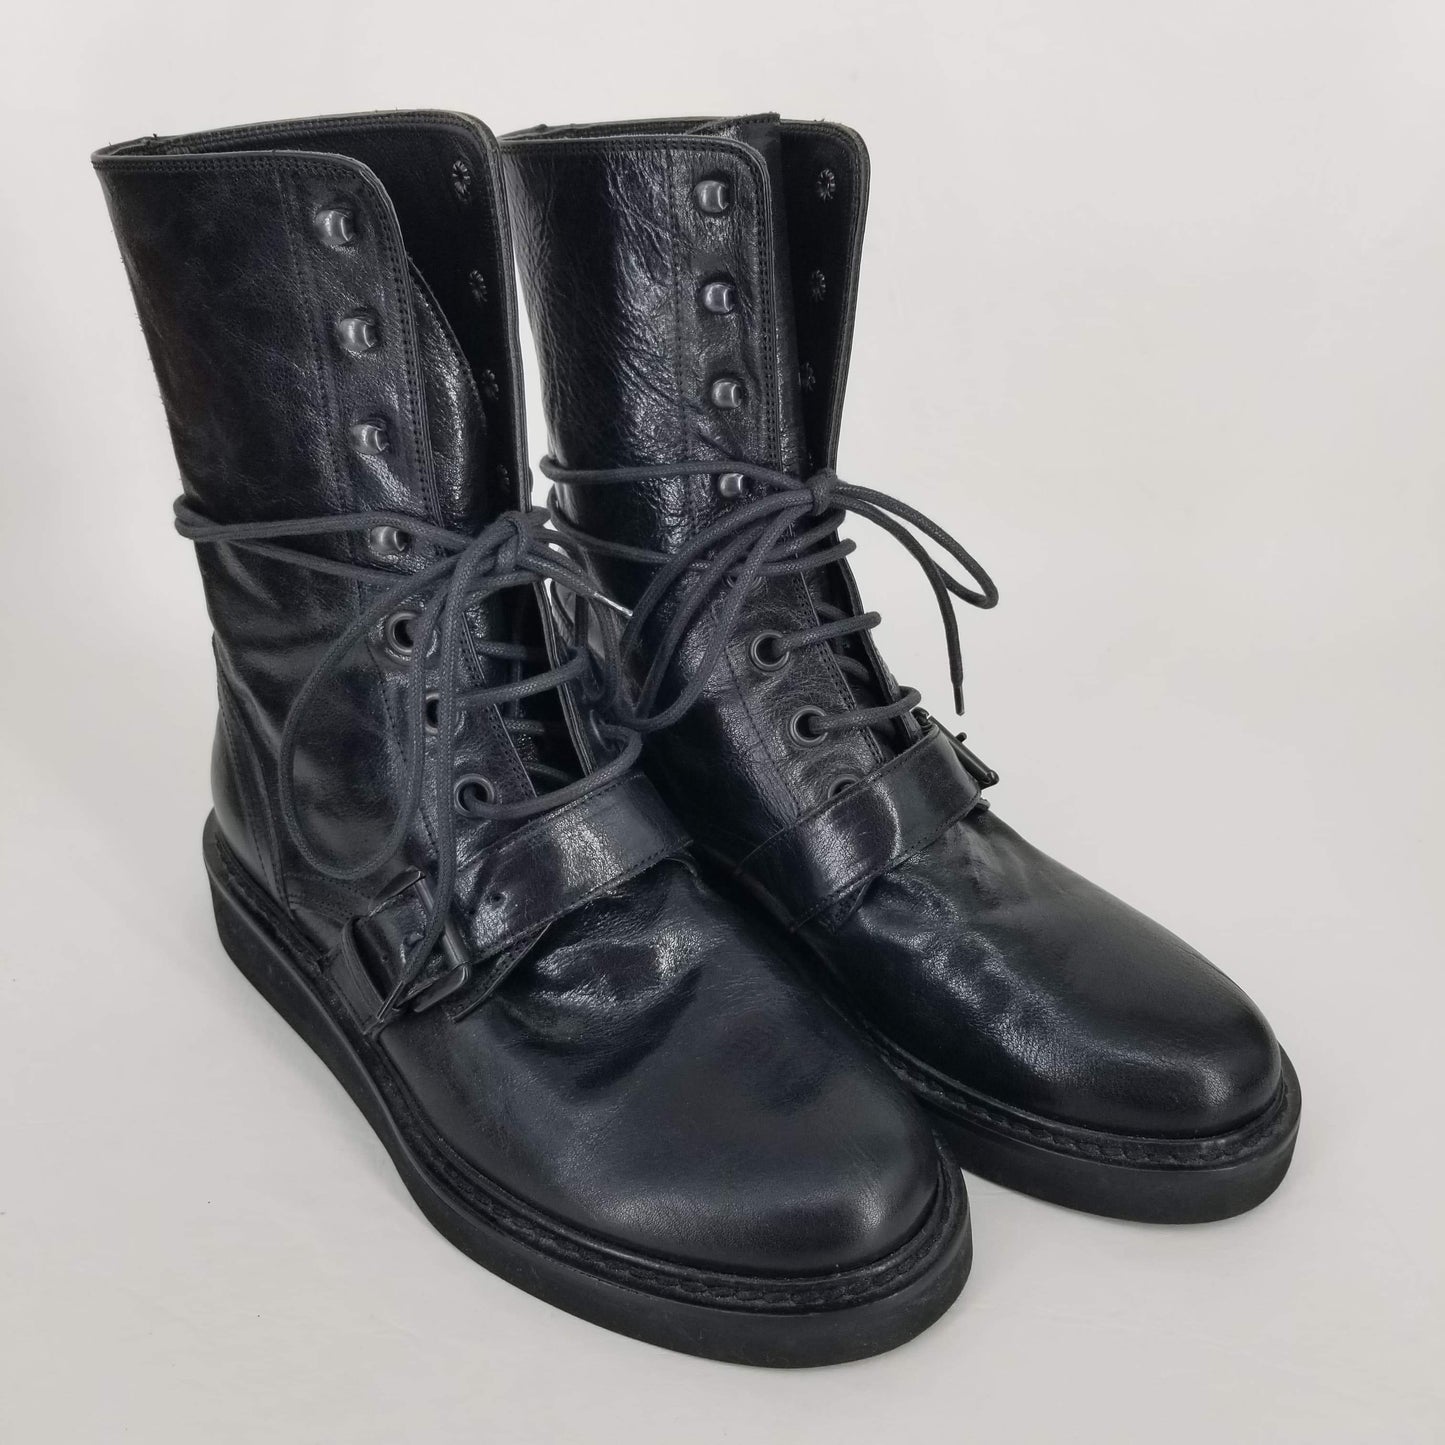 Authentic Demeulemeester Black Leather Lace Up Boots Women's Size 37-38 / 7